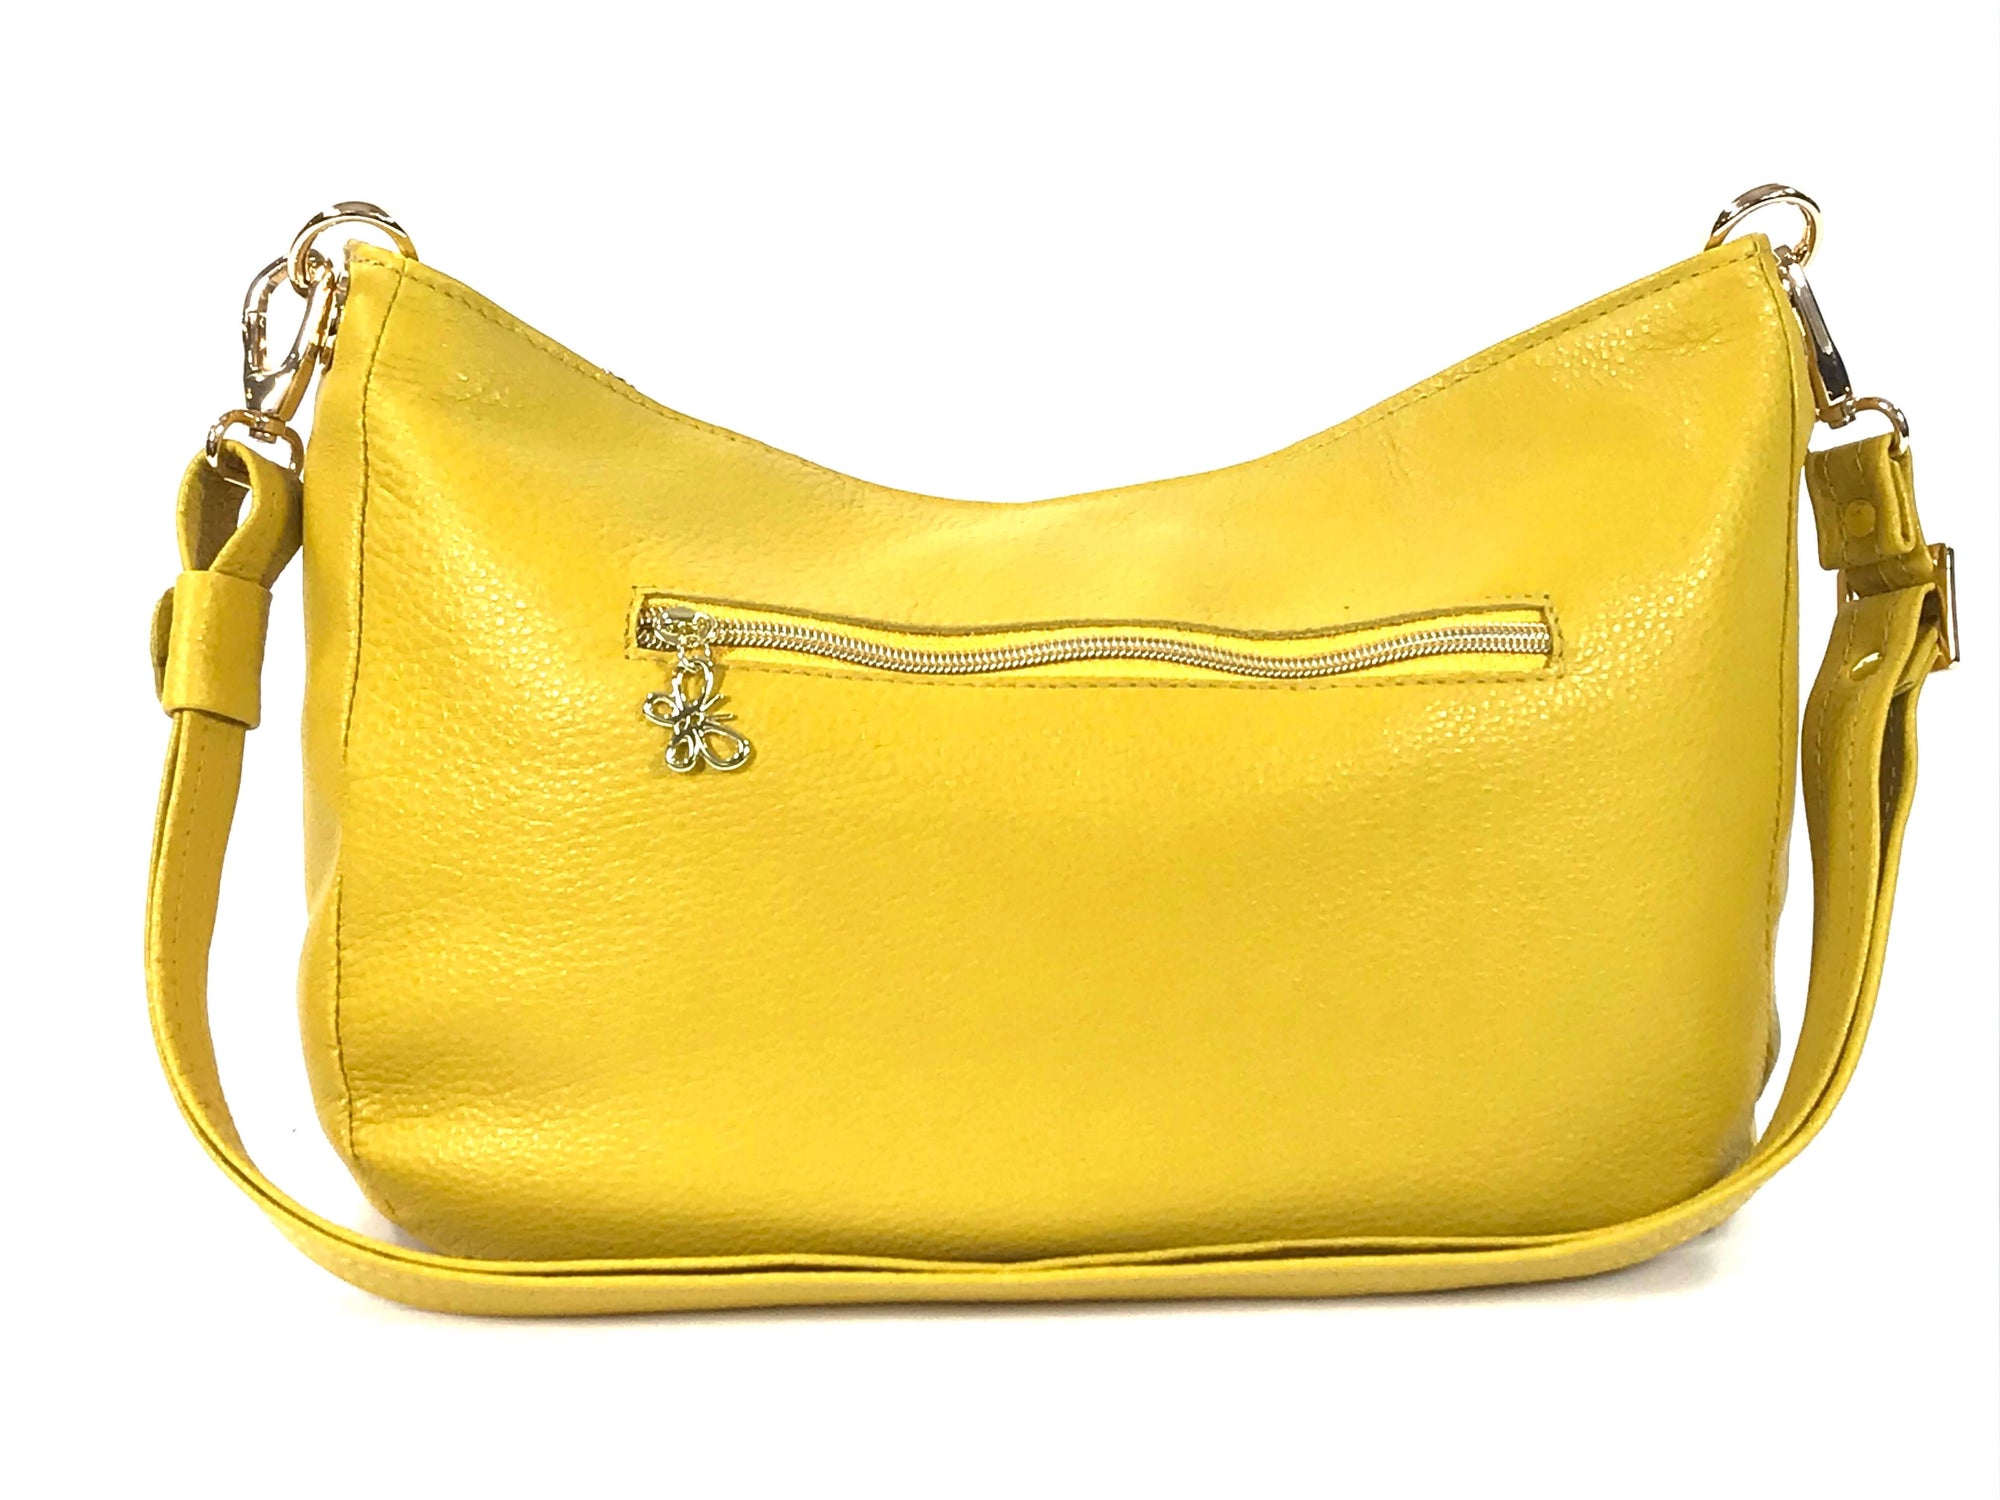 Yellow Leather Slouchy Hobo Bag back view